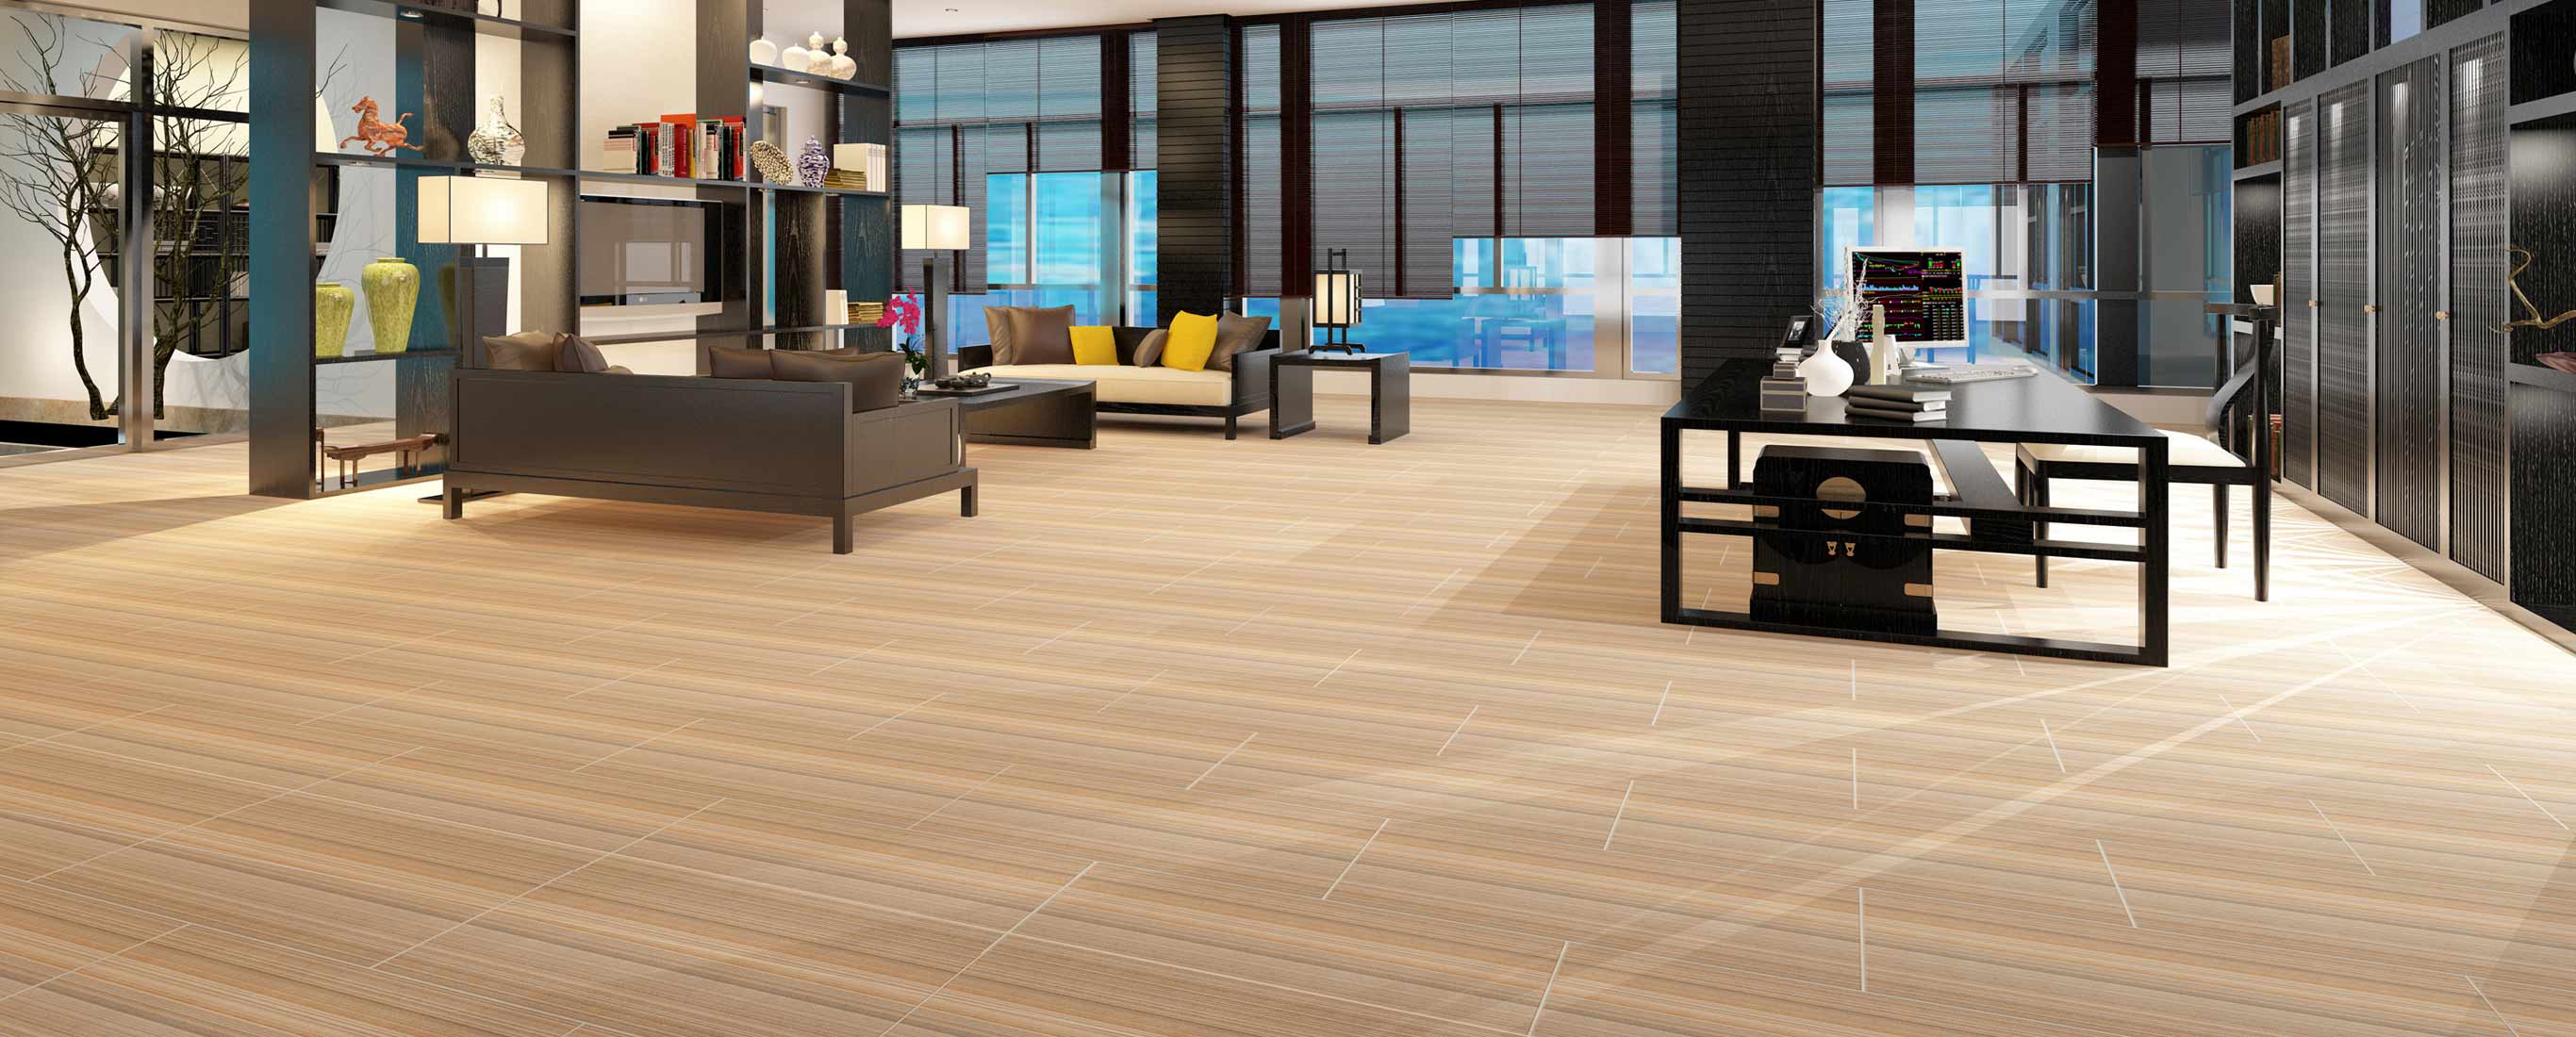 Commercial Tiles for Office Floor and Wall at The Best Price